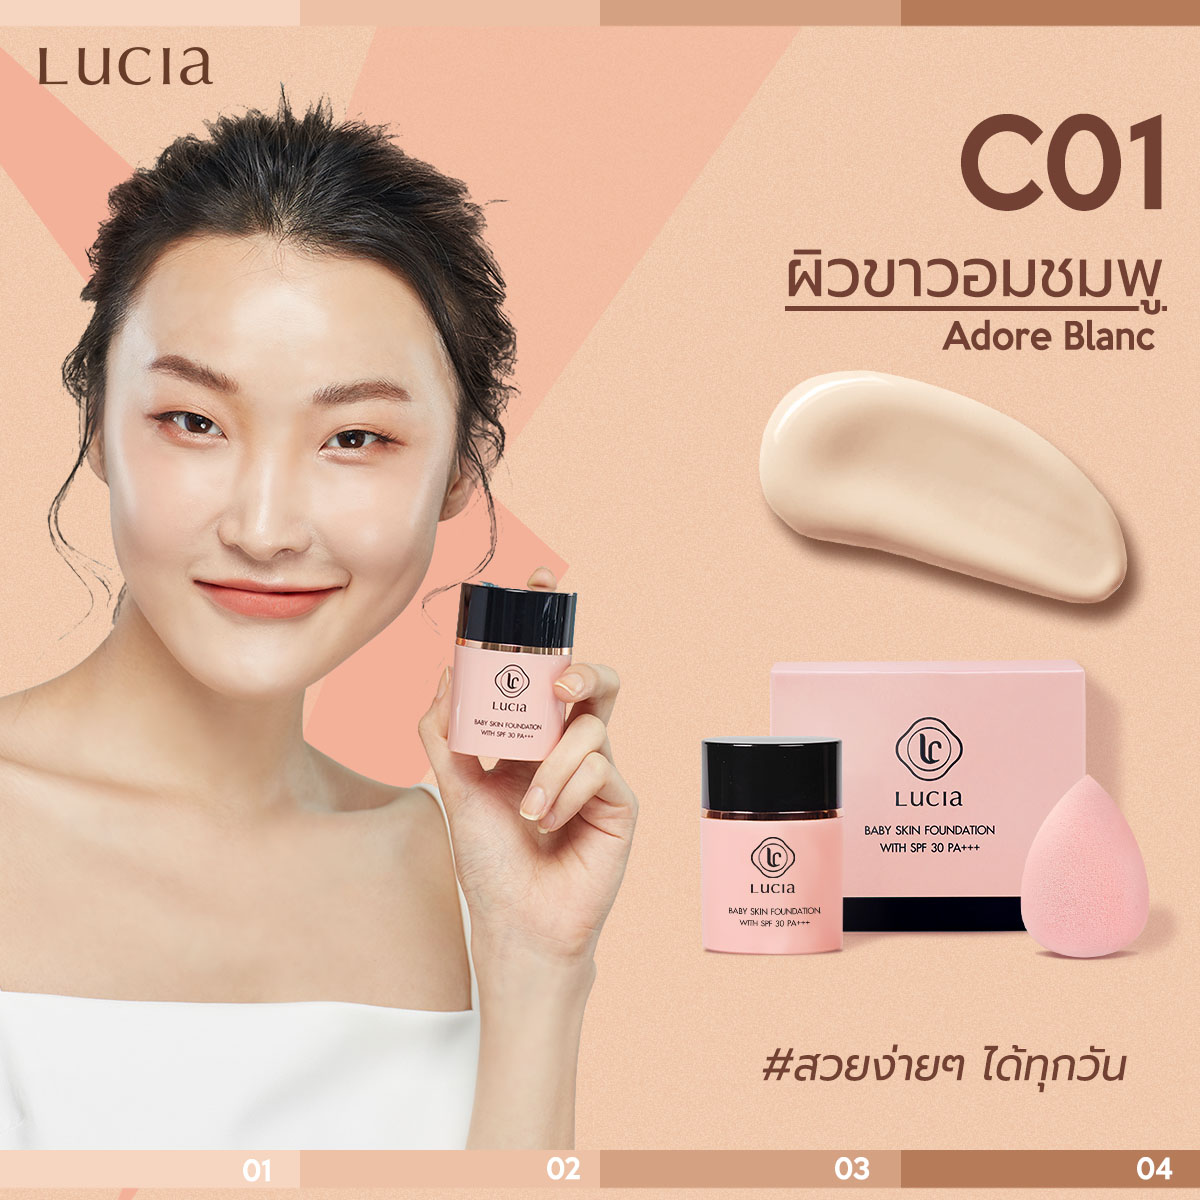 LUCIA !! BABY SKIN FOUNDATION WITH SPF 30 PA+++ 30 ml. #01 Adore Blanc